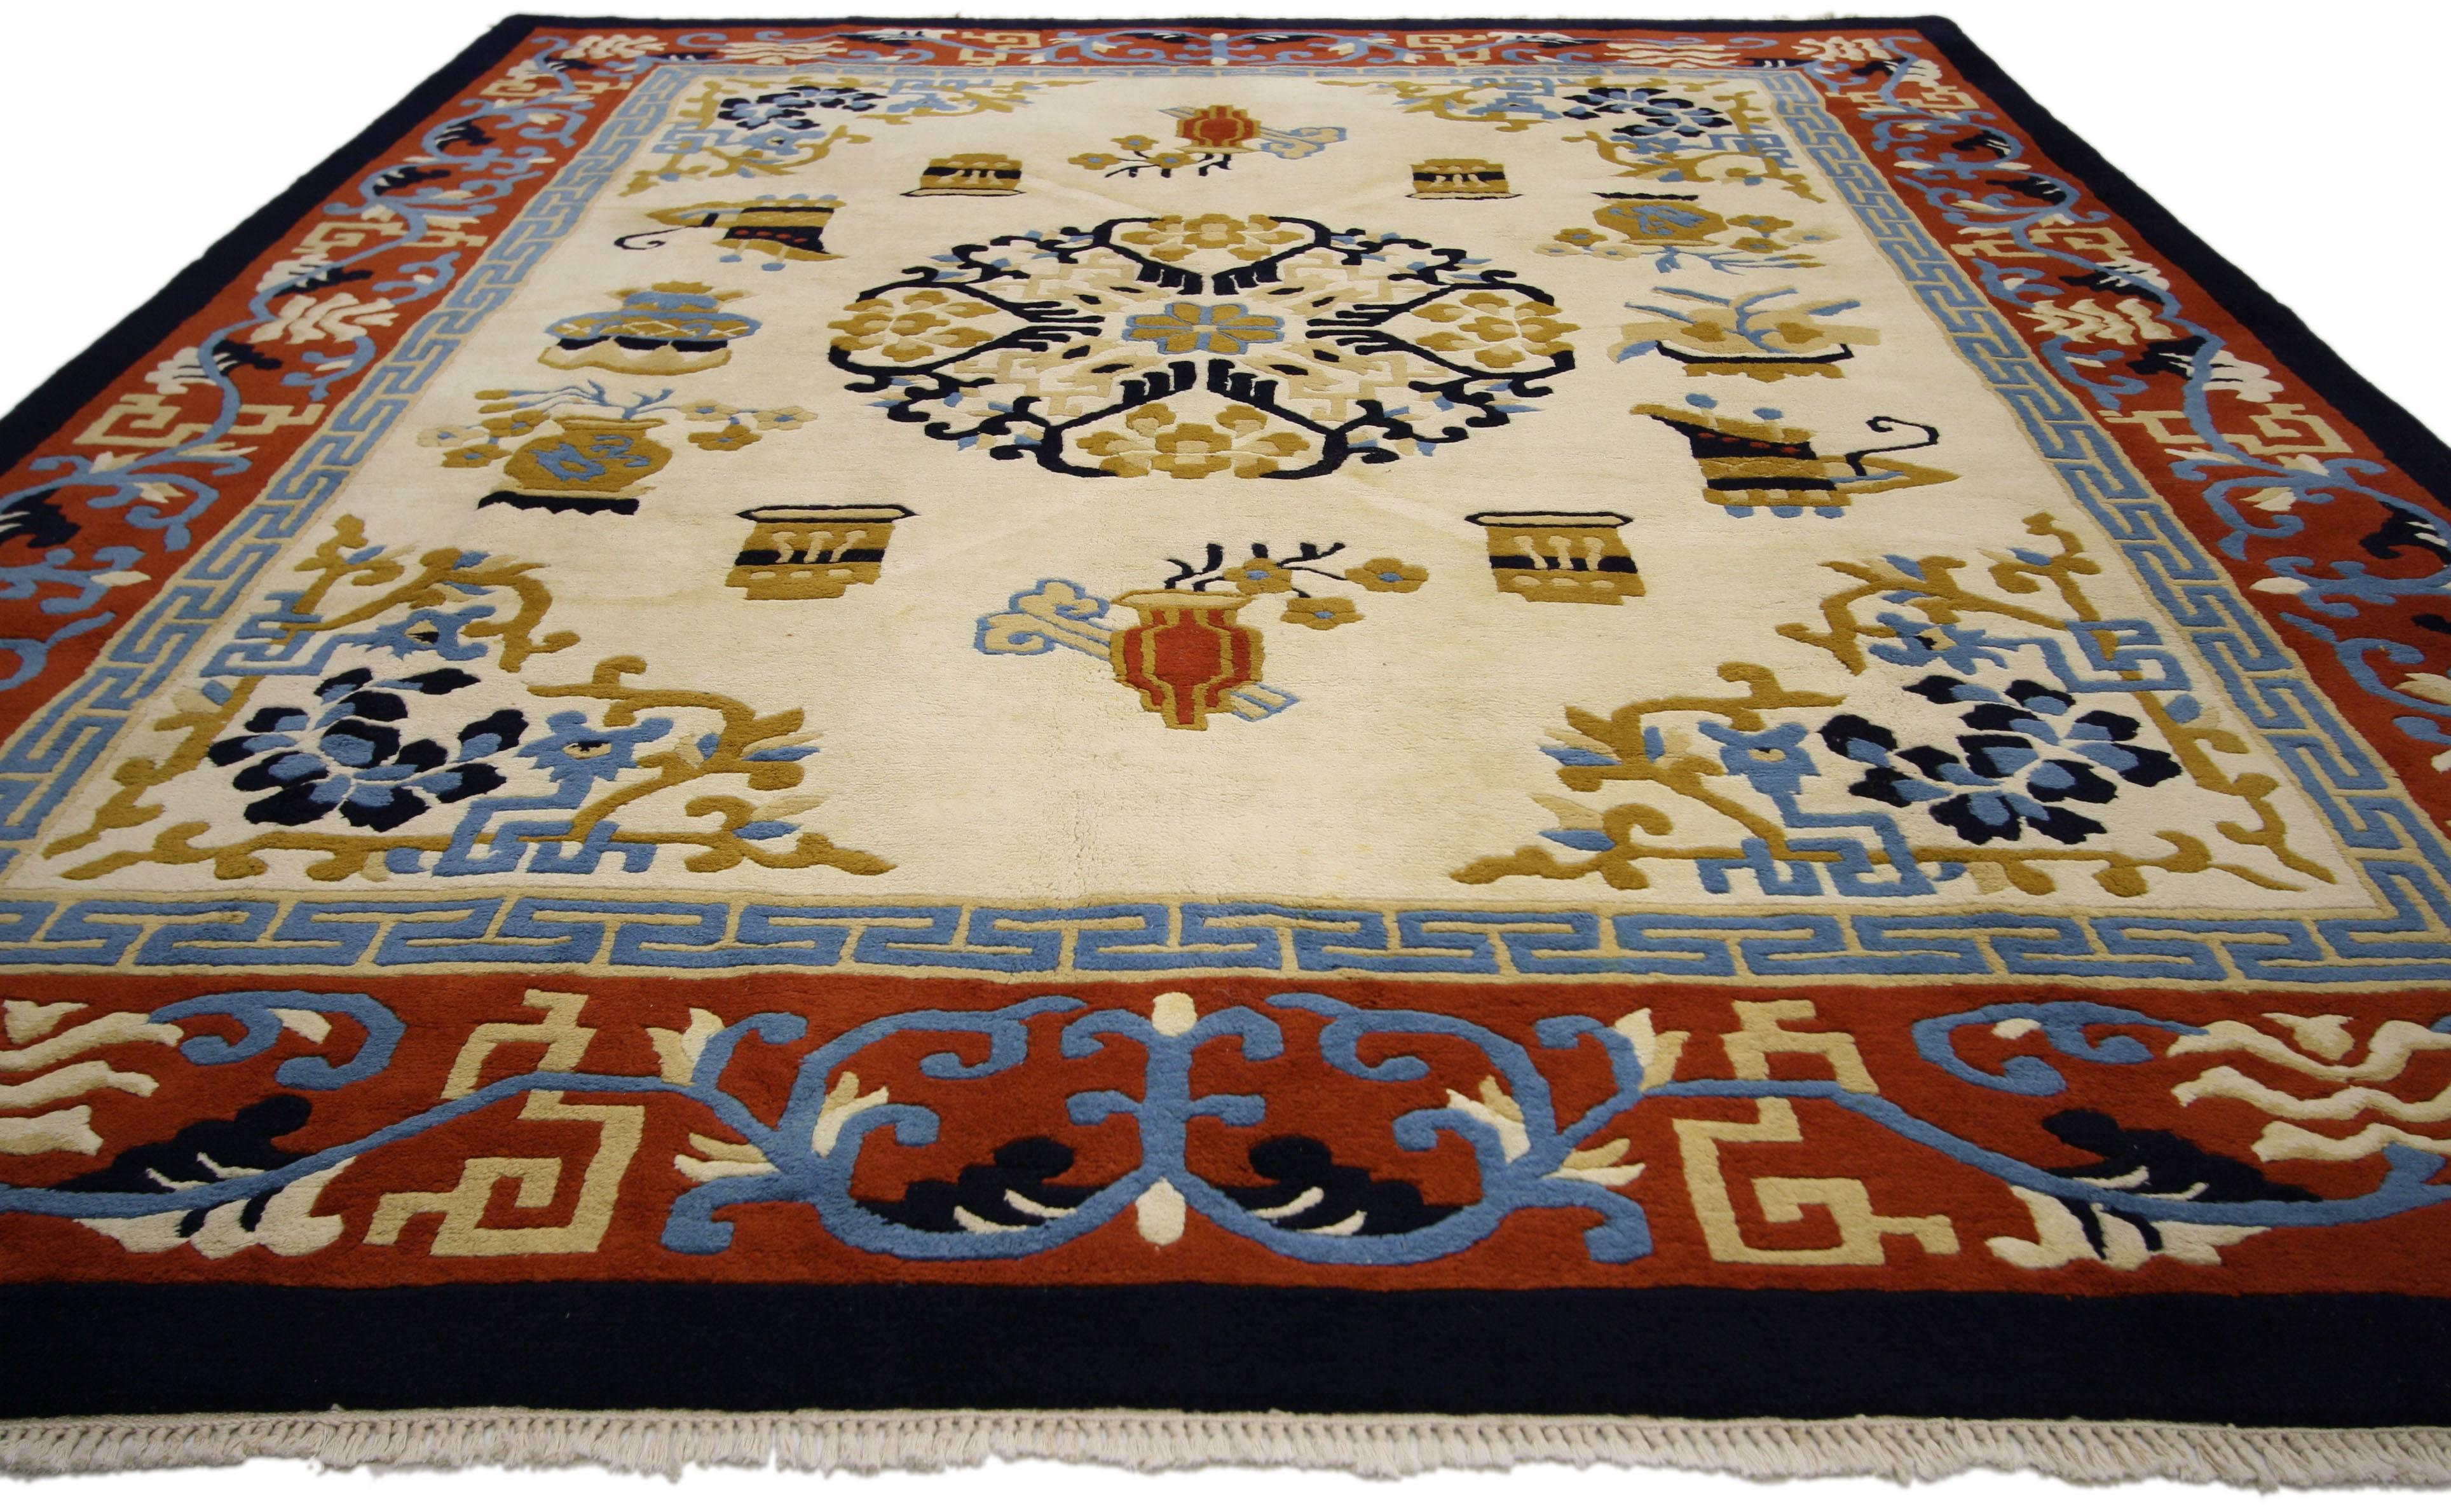 74745 Vintage Chinese Art Deco Style Rug 07'10 X 10'00.
This vintage Chinese Art Deco style rug was hand-knotted in India for the western market. Displaying a beige field with brick red border, this Chinese Art Deco style rug features a round floral